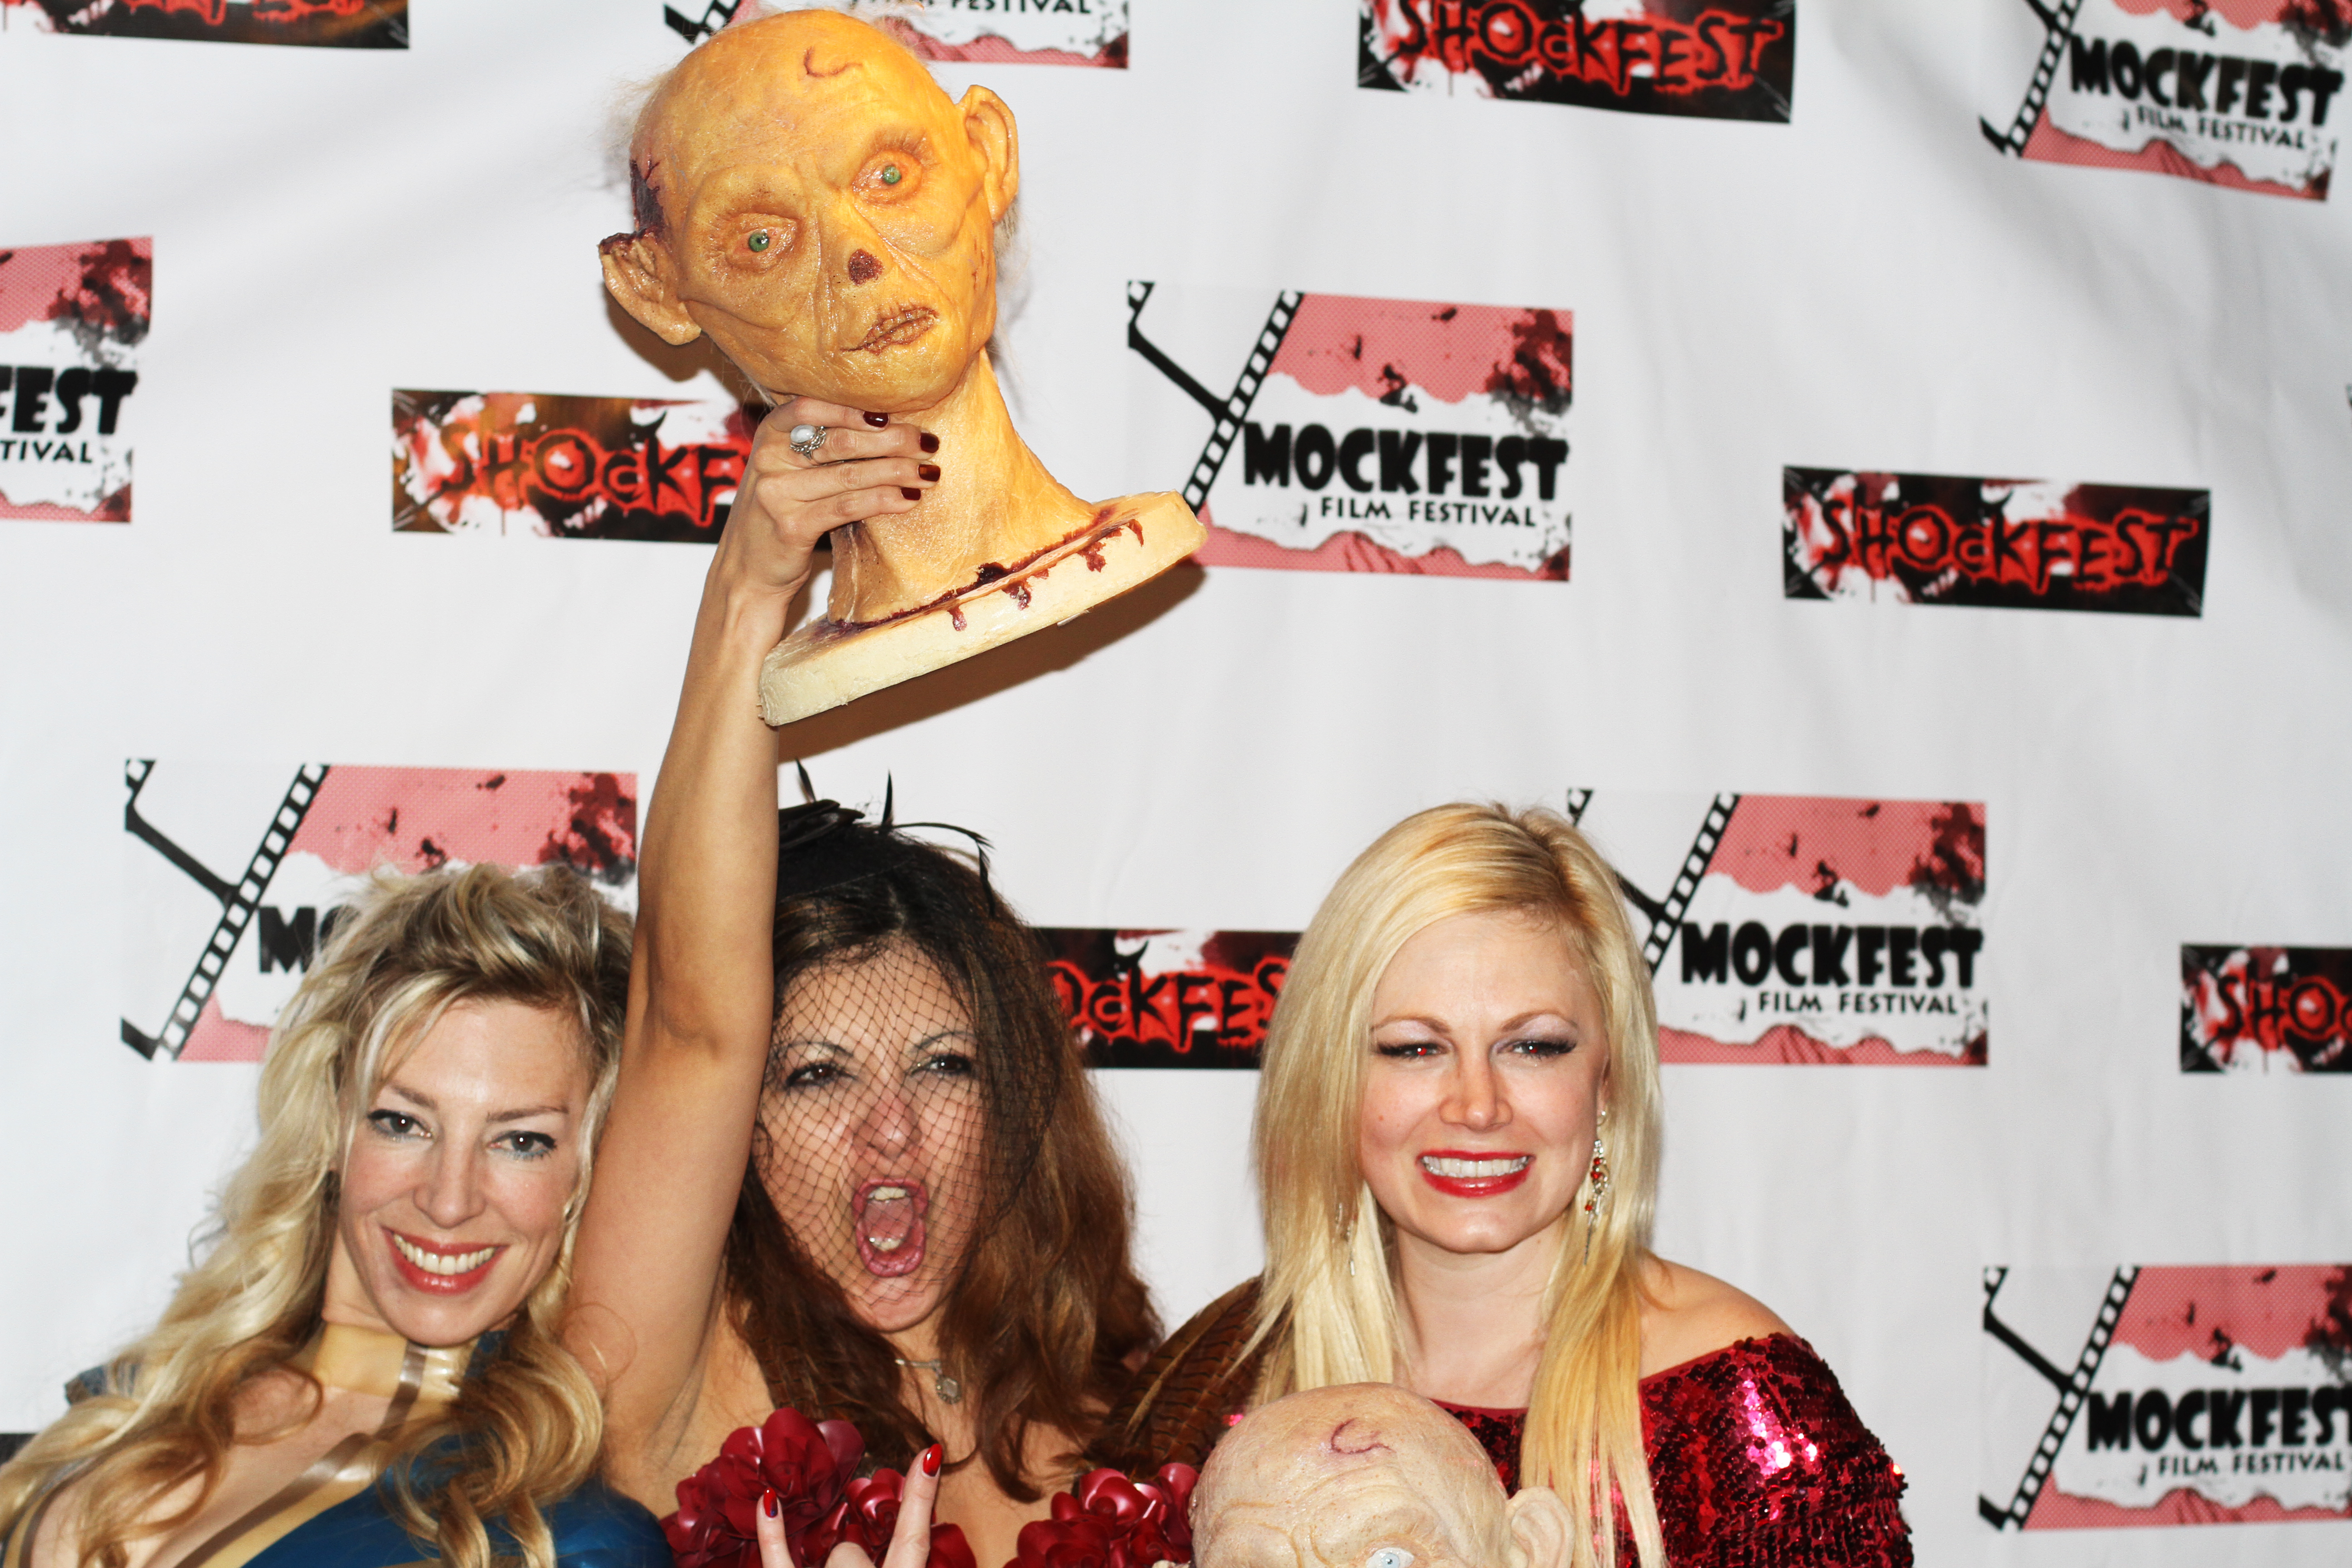 With actresses Jenimay Walker (Ceramic Tango, Serpent's Lullaby) and actress/director Jessica Cameron (Truth or Dare). On the red carpet at the Shockfest Film Festival, holding our awards. Raleigh Studios, in Hollywood, CA (USA).